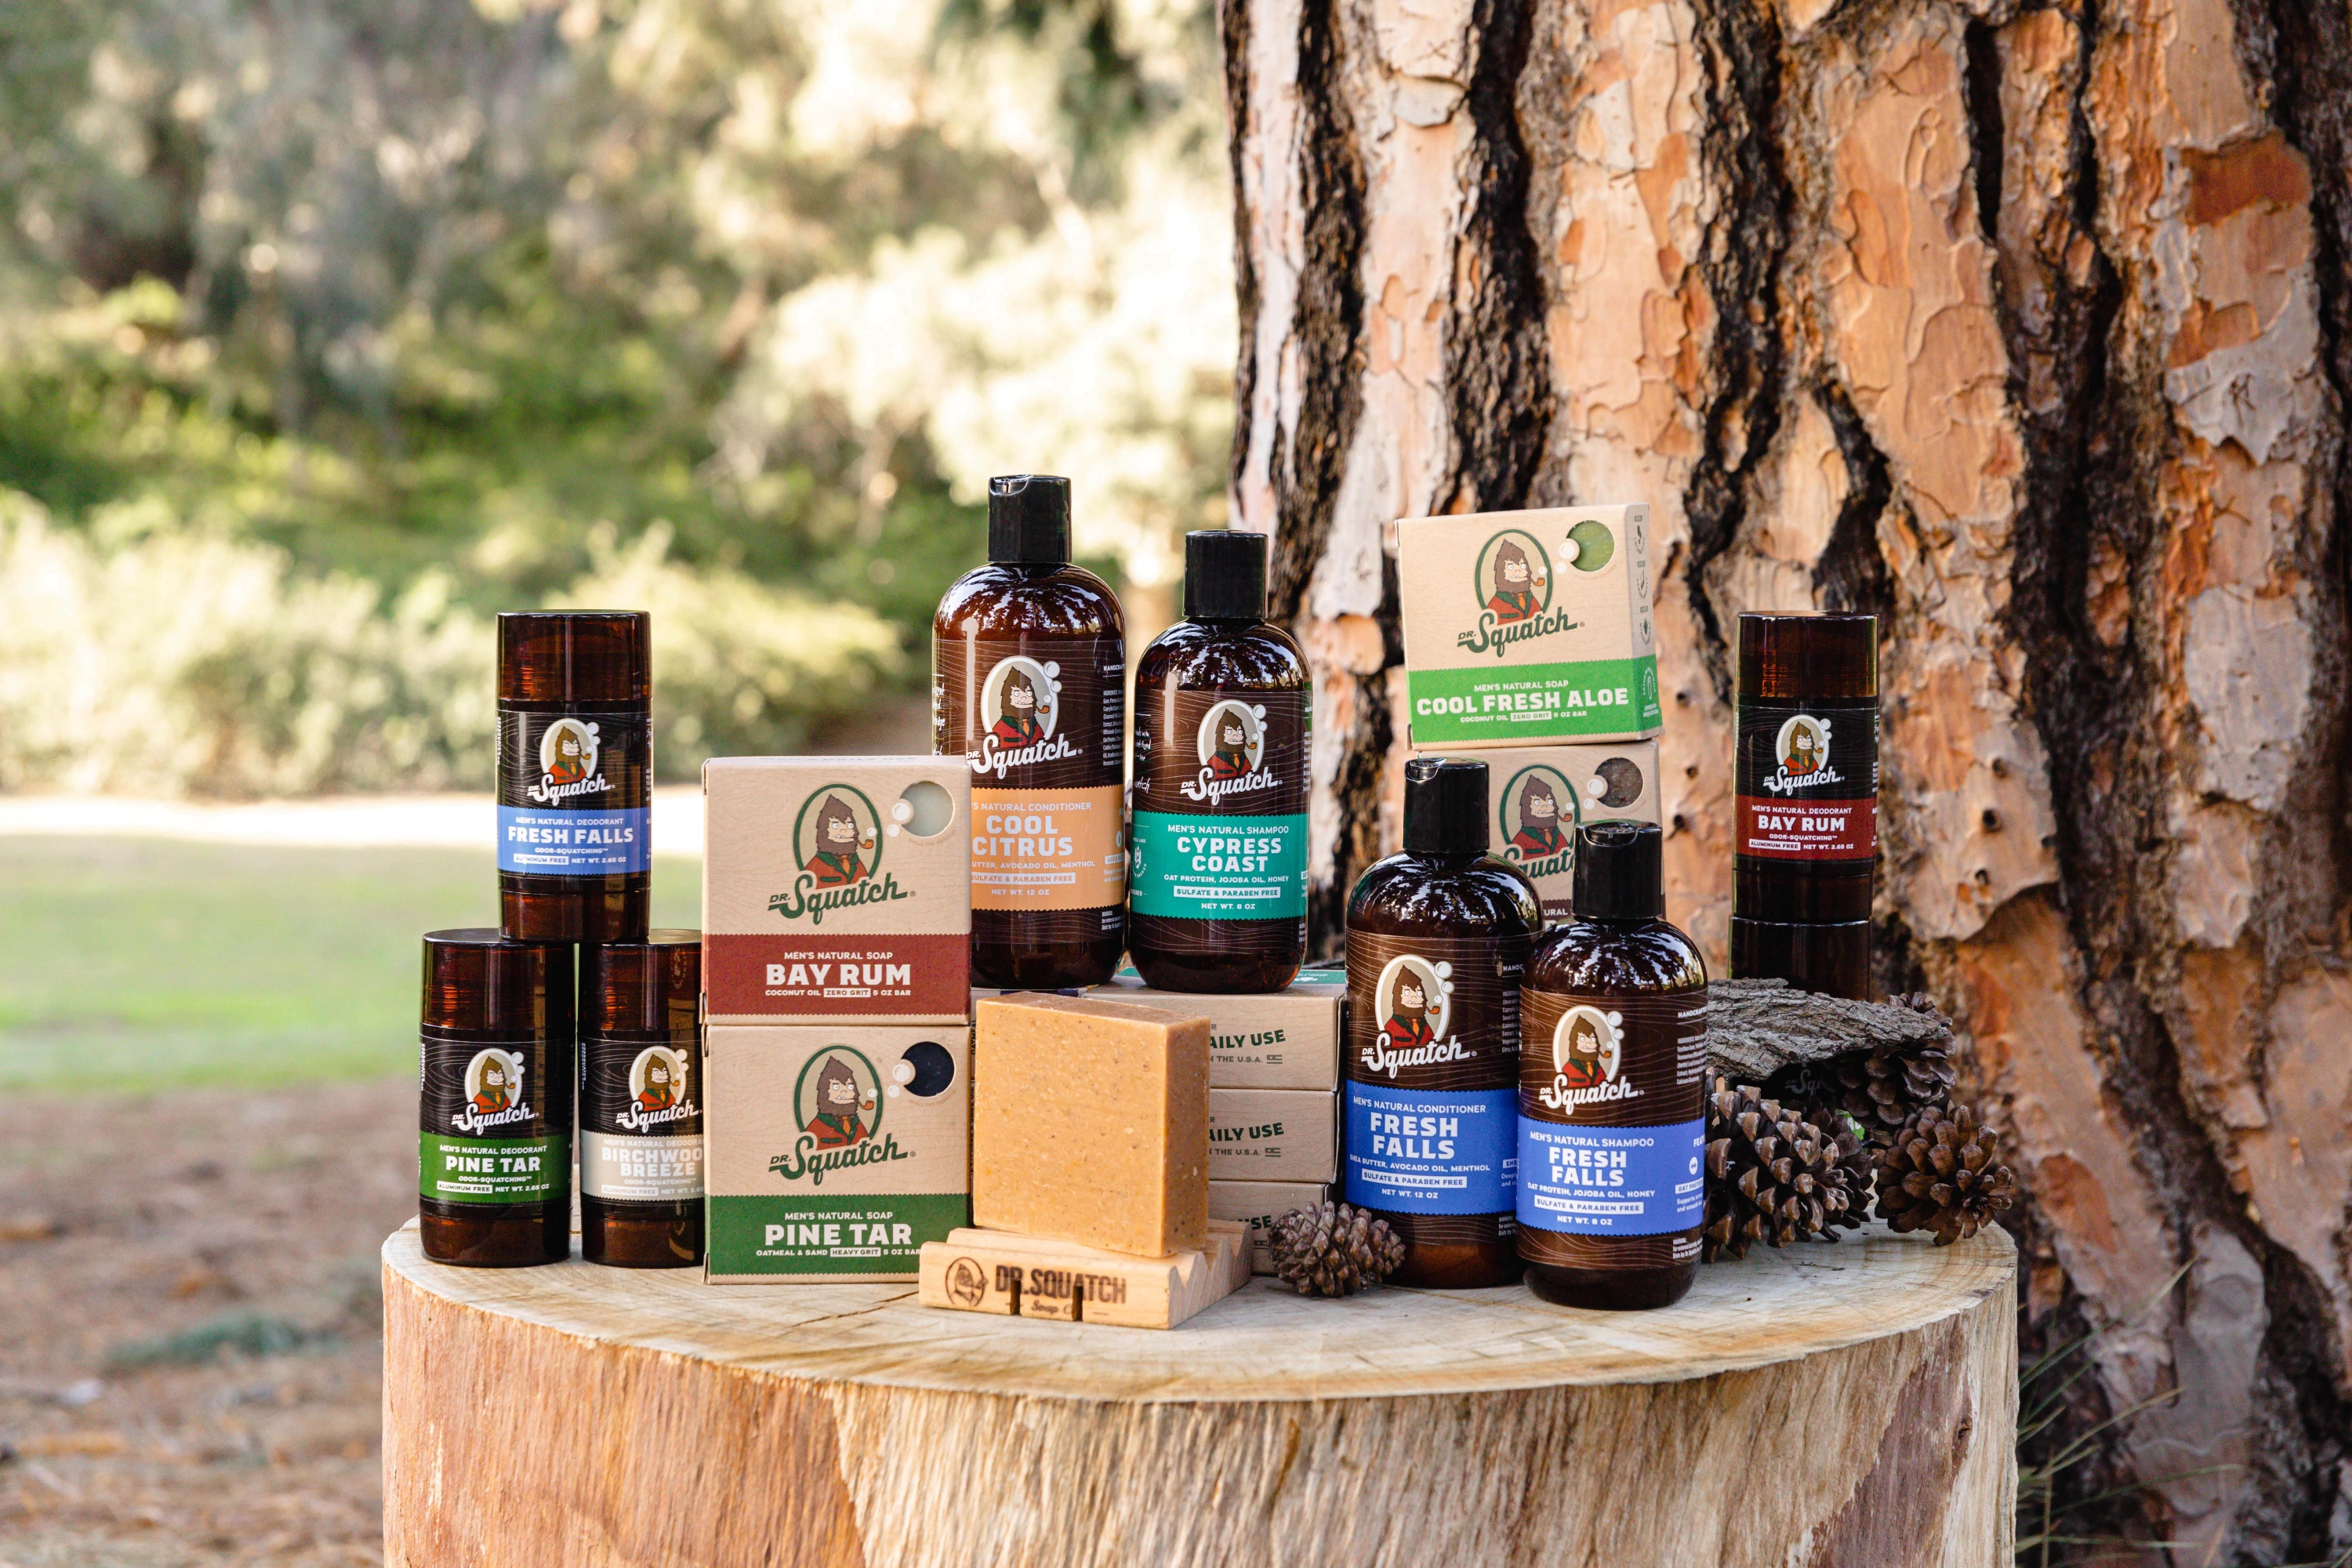 Dr. Squatch Offers the Best Way to Build Your Own Bundle of Body Care  Products - The Manual